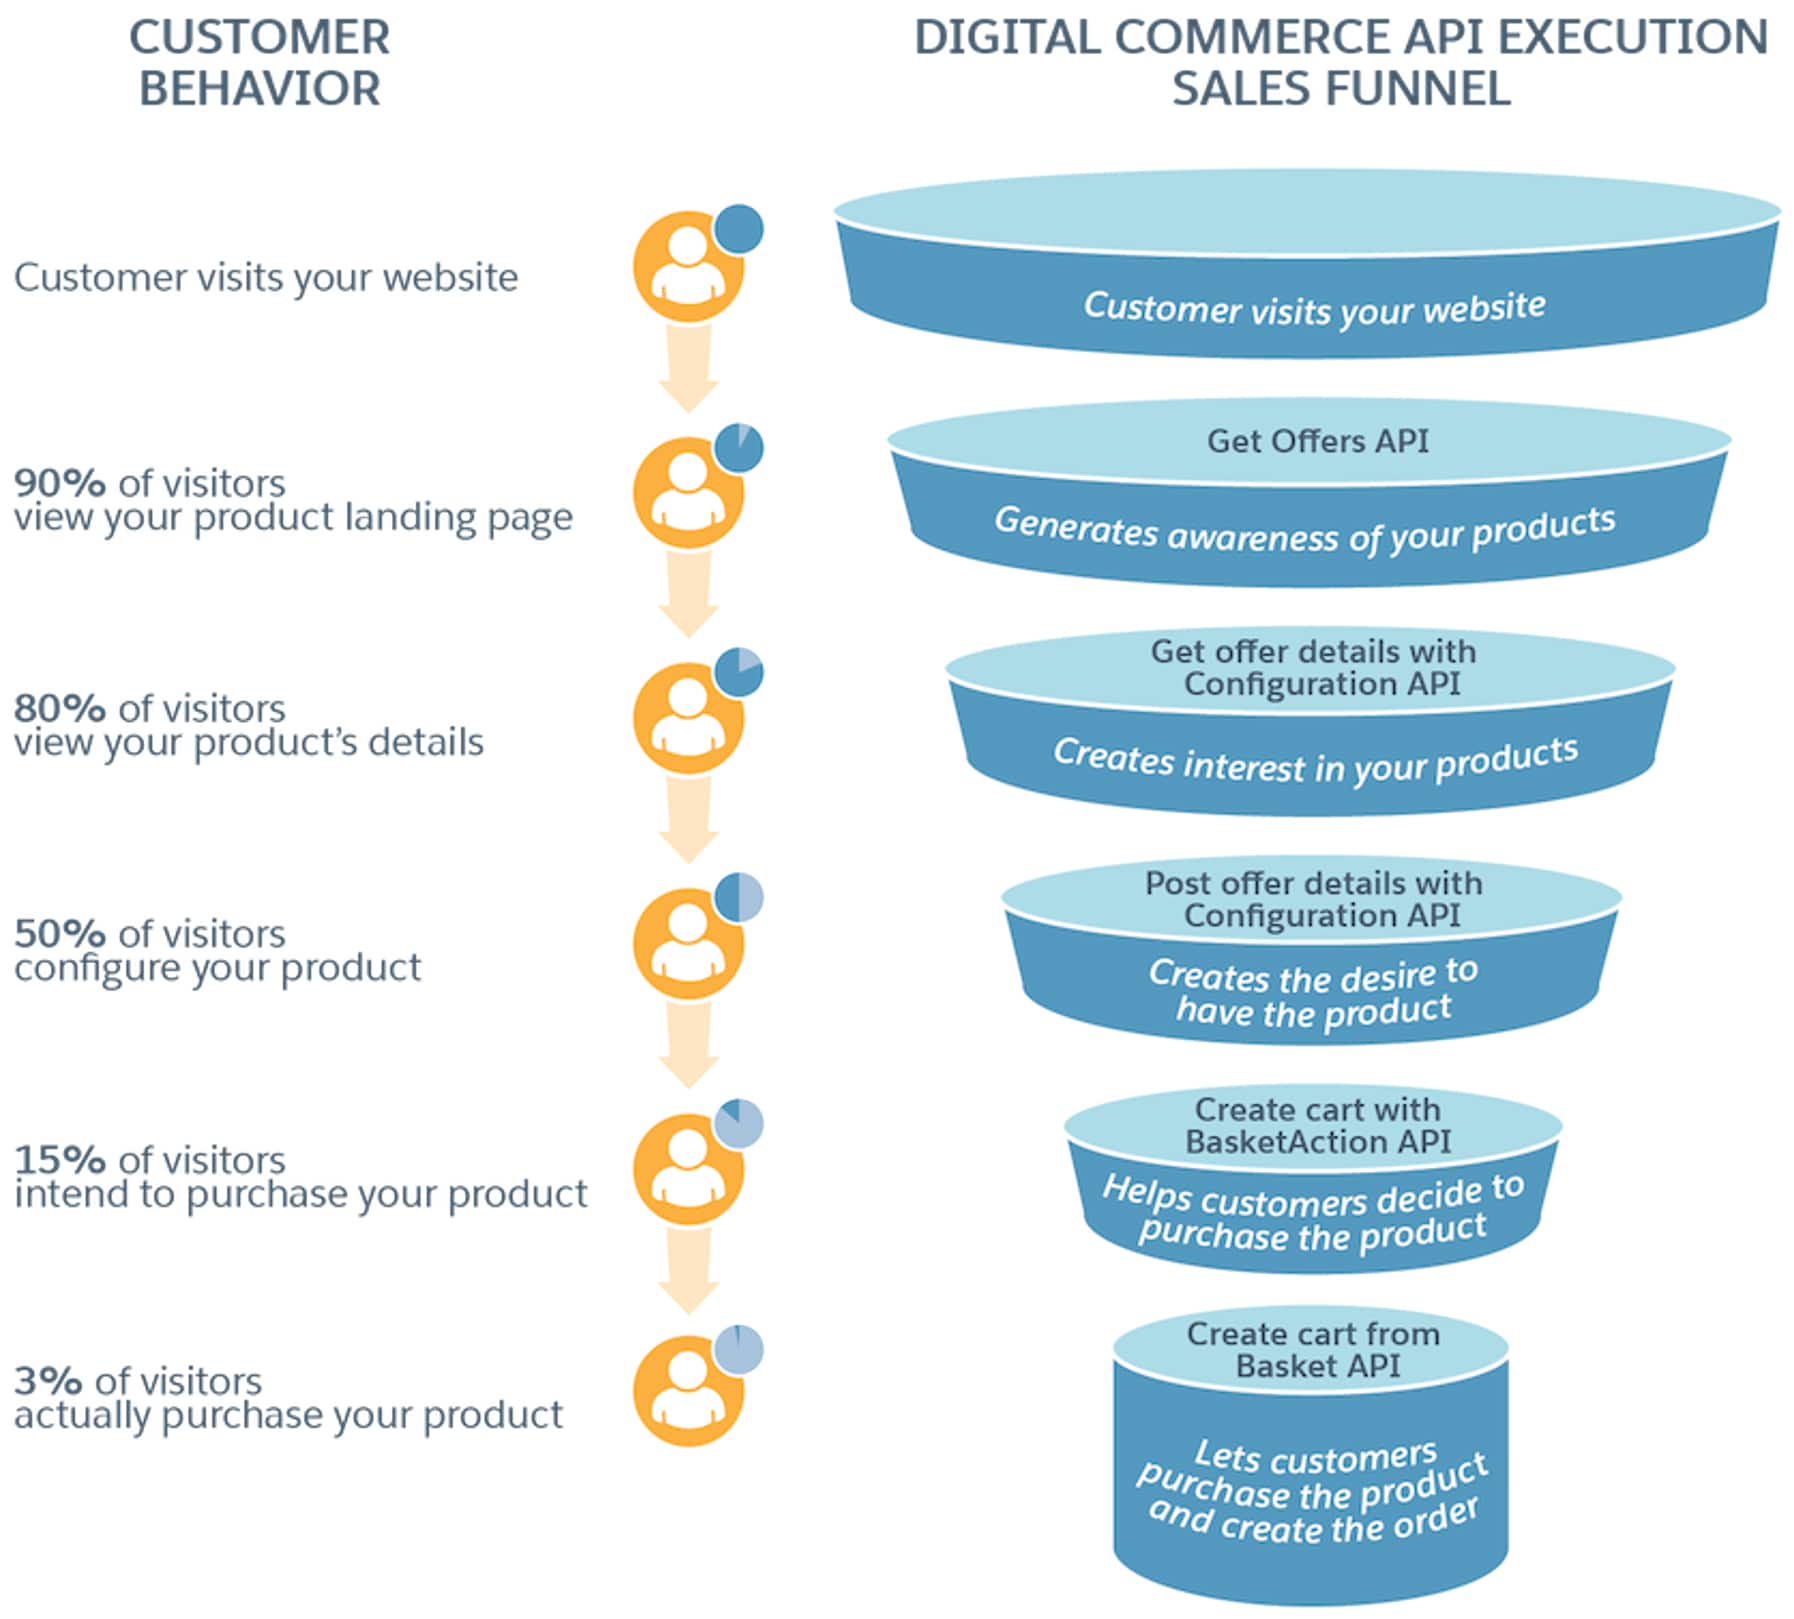 A typical conversion funnel based on the sales process that you can use to convert prospects to actual customers.